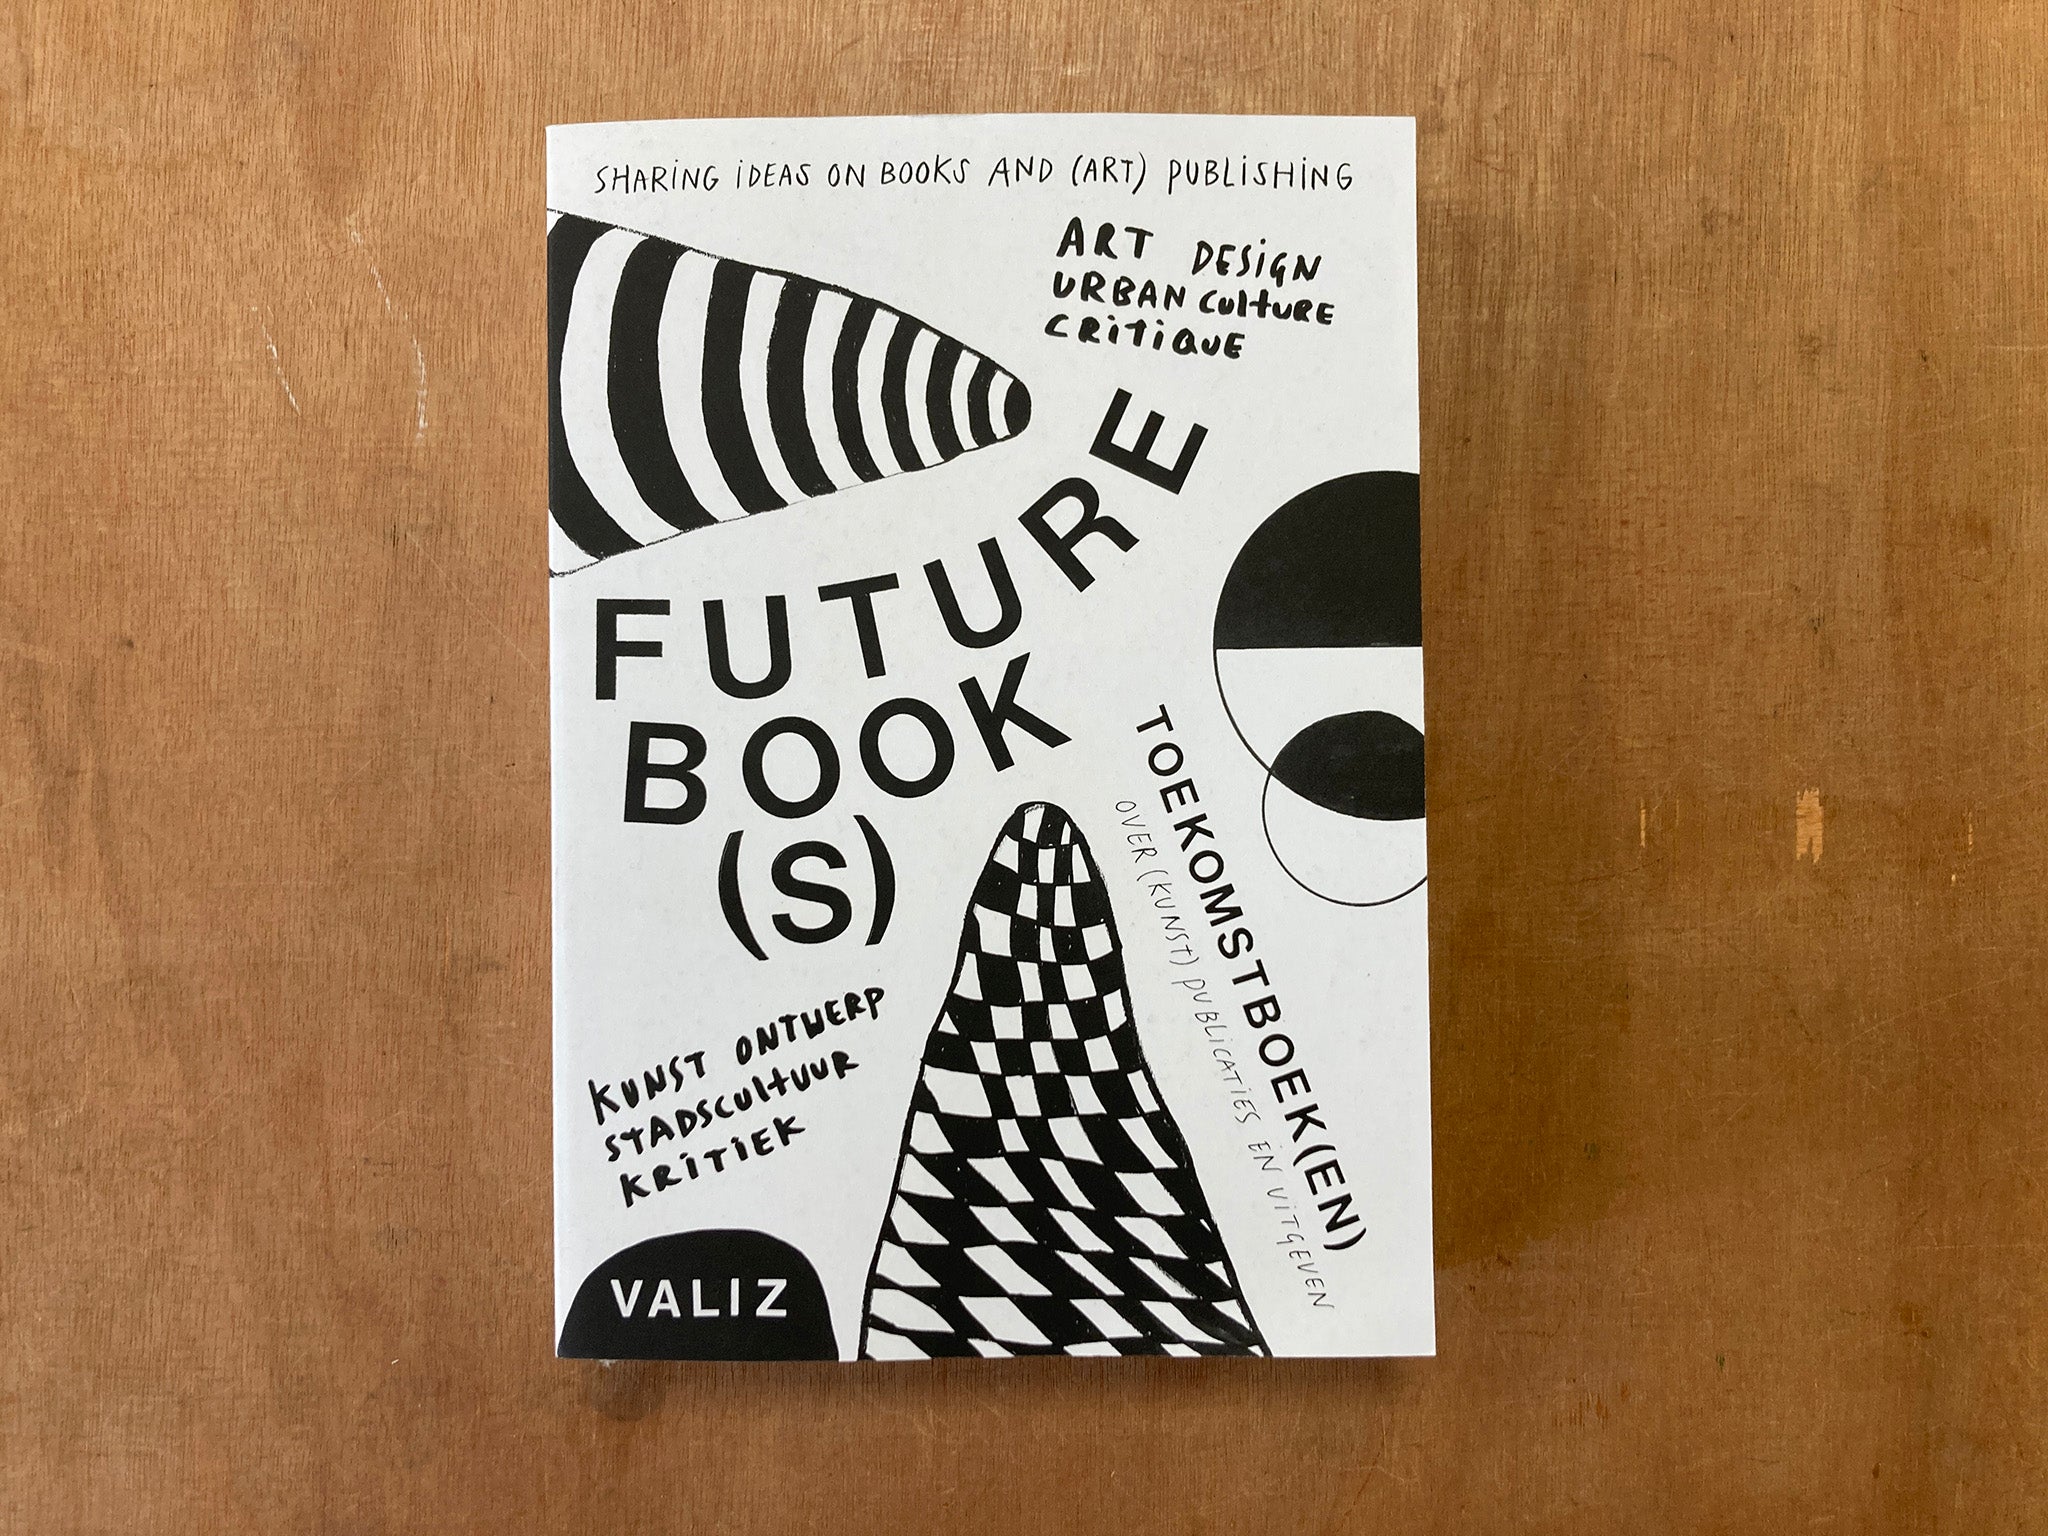 FUTURE BOOK(S): SHARING IDEAS ON BOOKS AND (ART) PUBLISHING edited by Pia Pol and Astrid Vorstermans